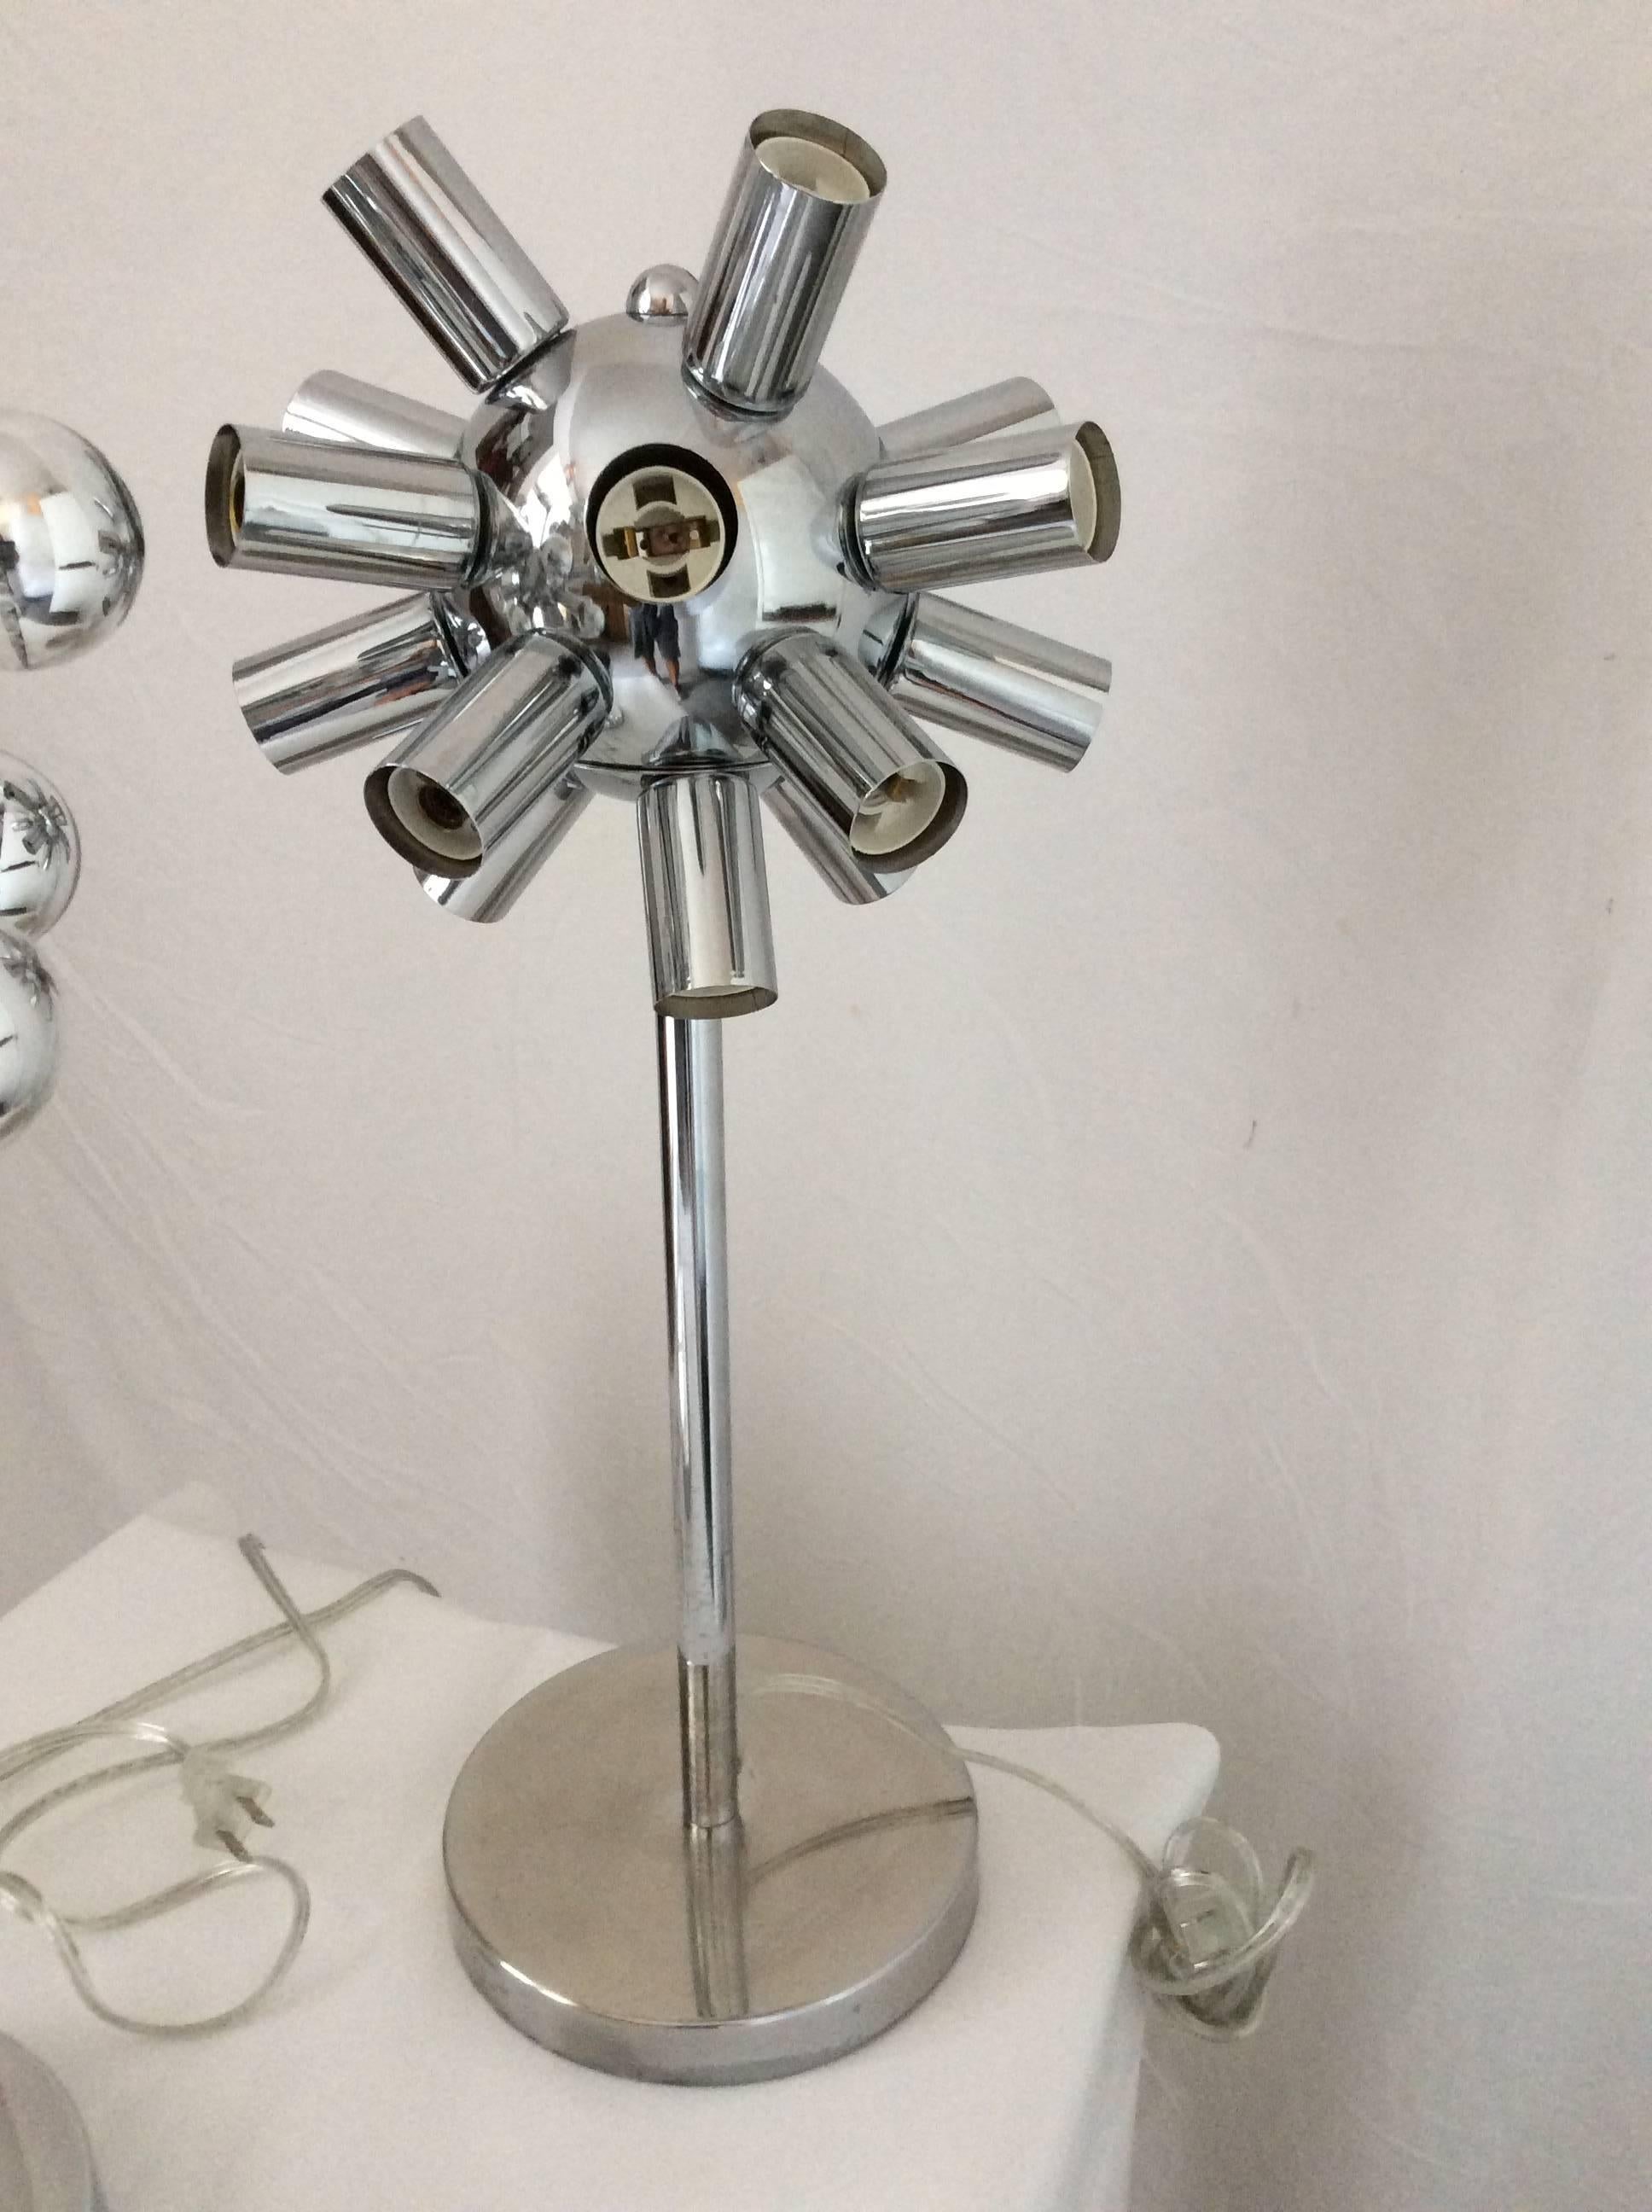 You are looking at a pair of table lamps in the Sputnik style. They are made of metal with chrome fin. Each lamp has a round base and a center stem which has a round globe from which 16 bulbs are arranged around it. Lamps have that cool retro feel.